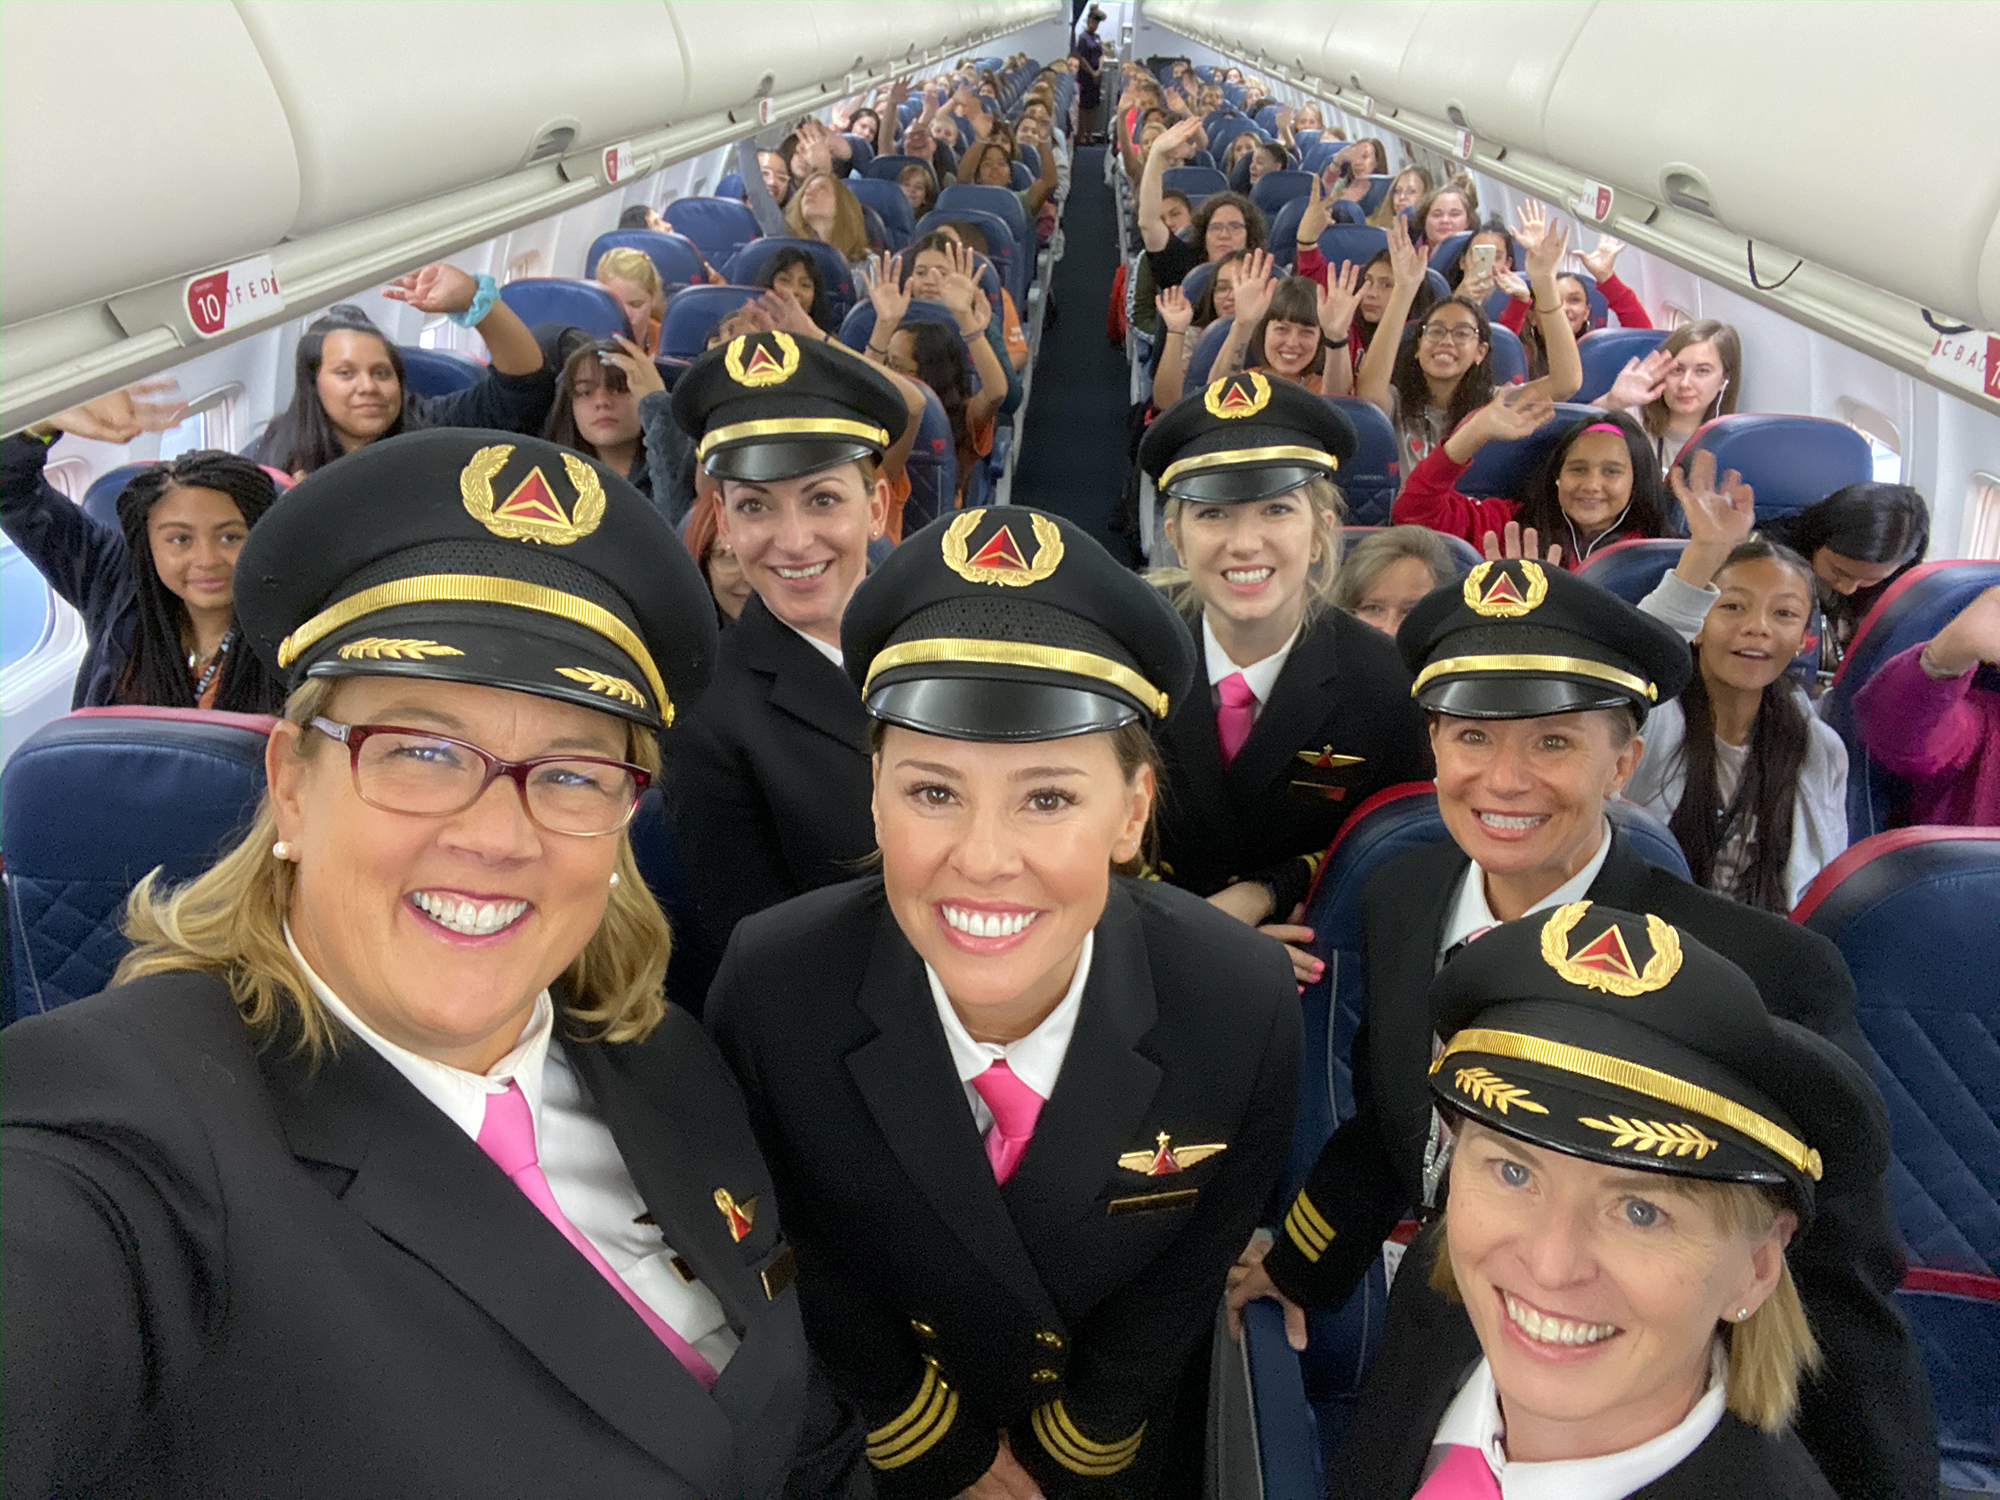 Female crew and passengers onboard a Delta flight headed to NASA in Houston in October 2019 as part of the company's initiative to close the gender gap in aviation. (Delta News Hub)